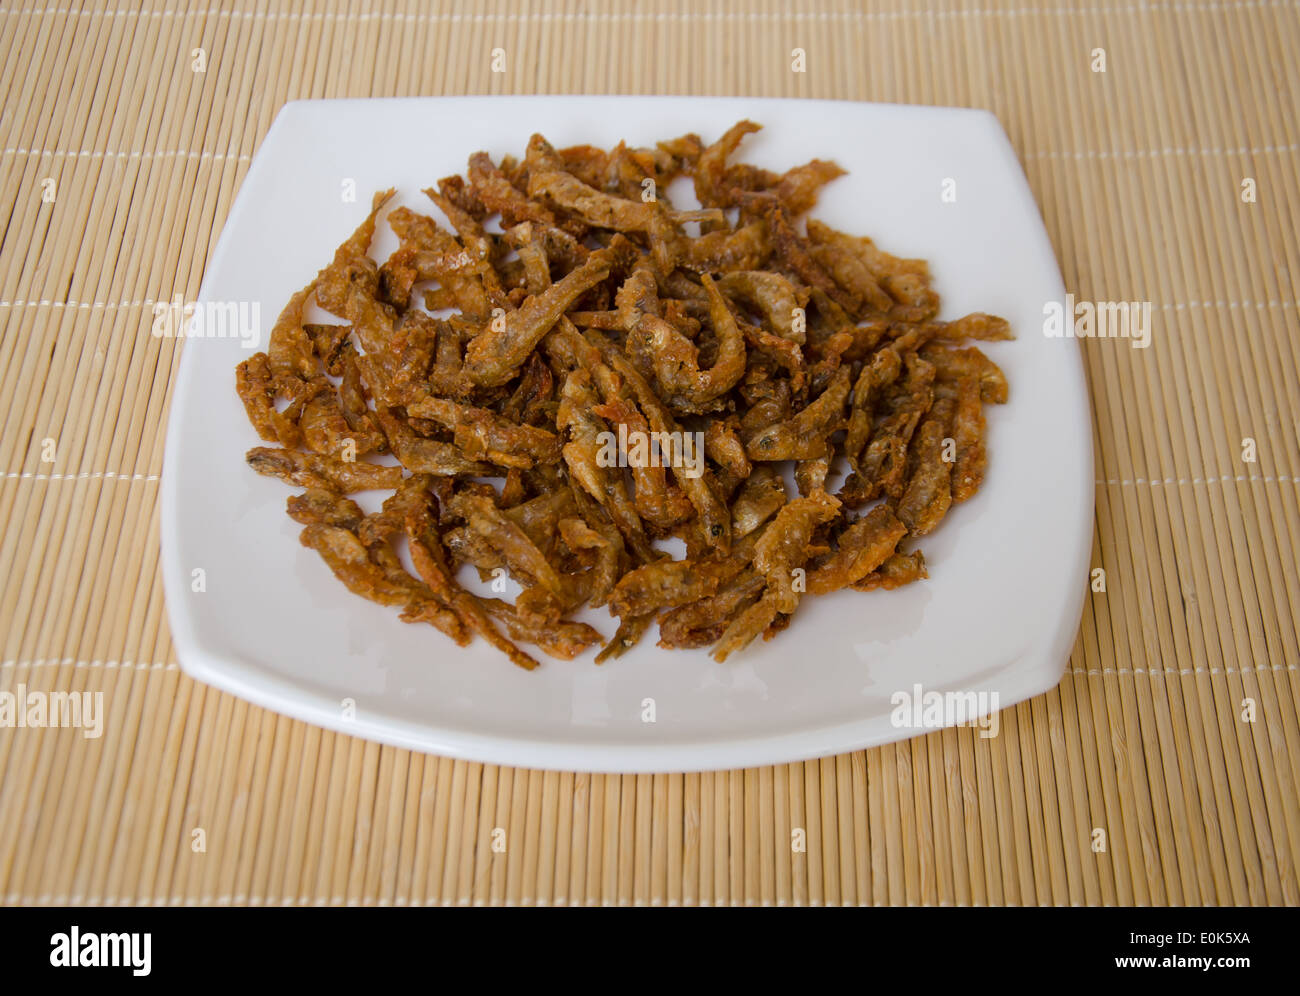 fried small fish for healthy food Stock Photo